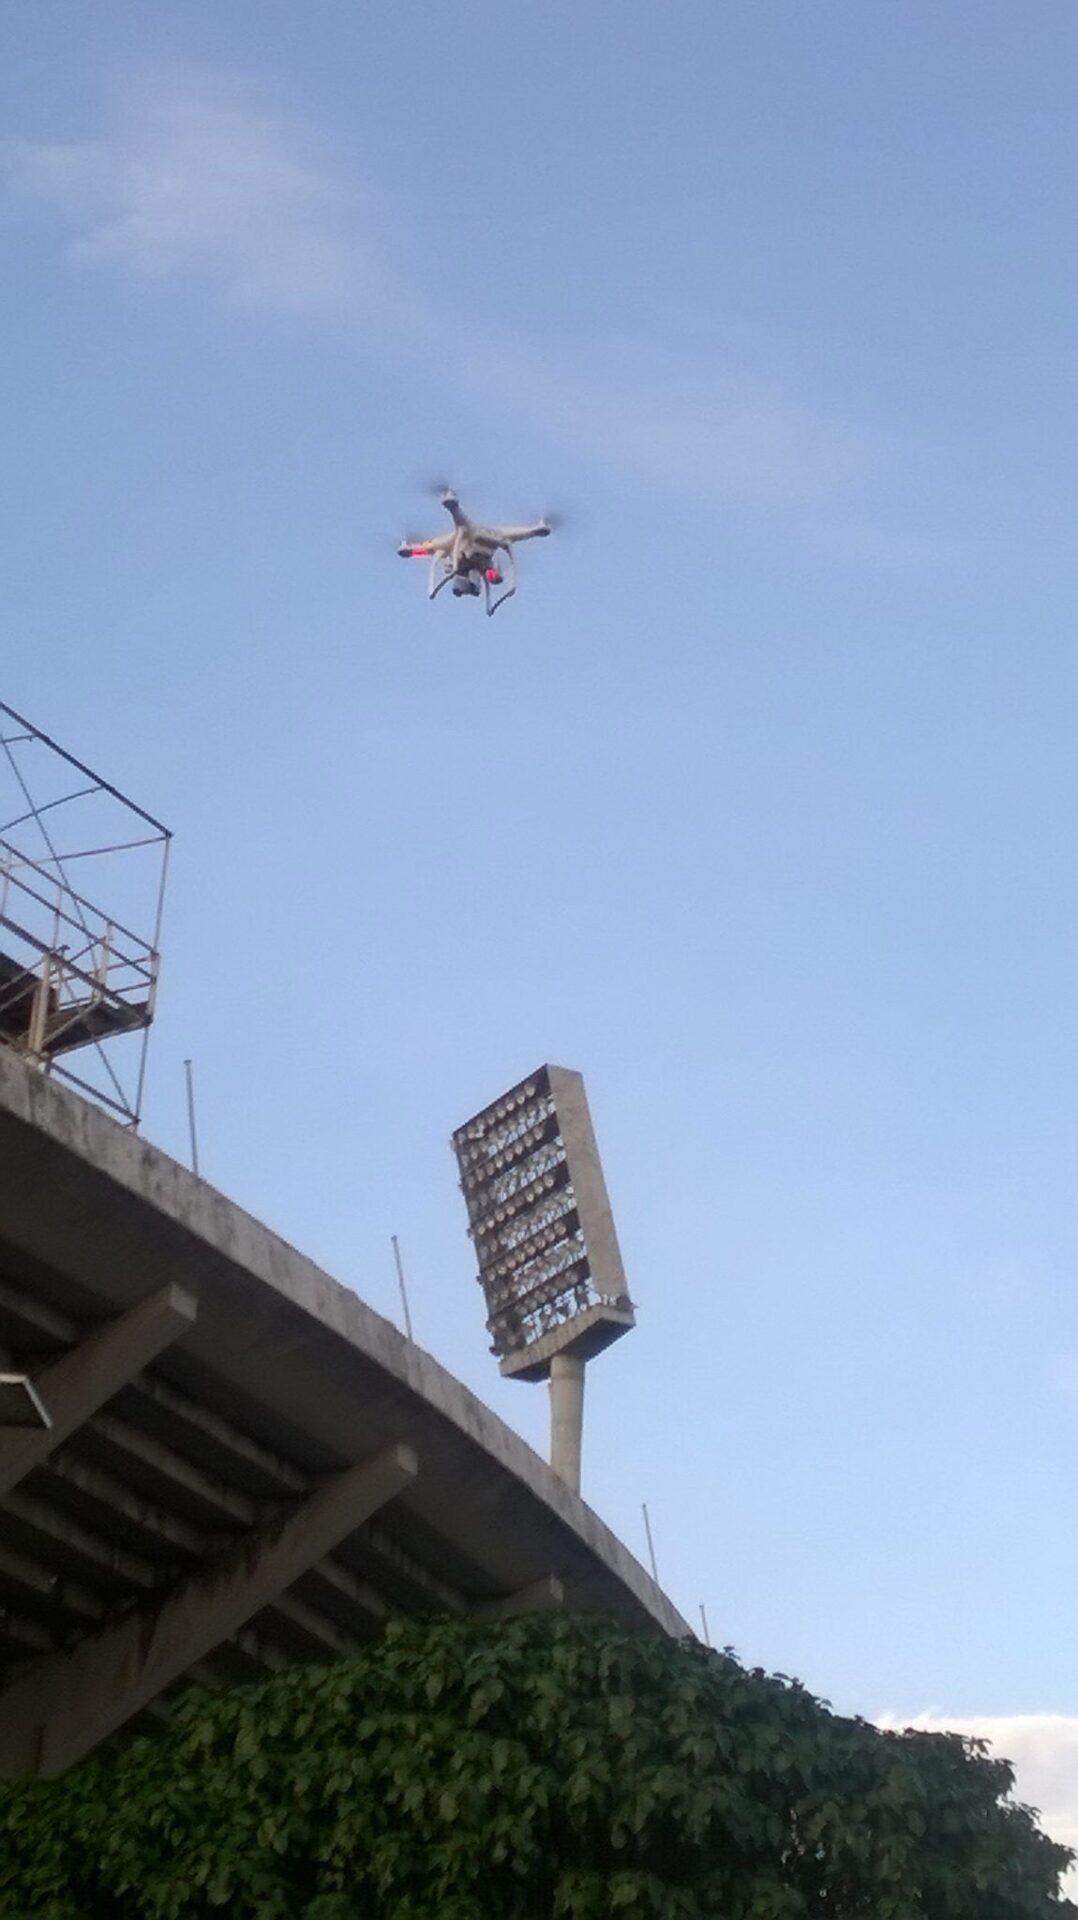 A drone in flight over the National Stadium, Lagos